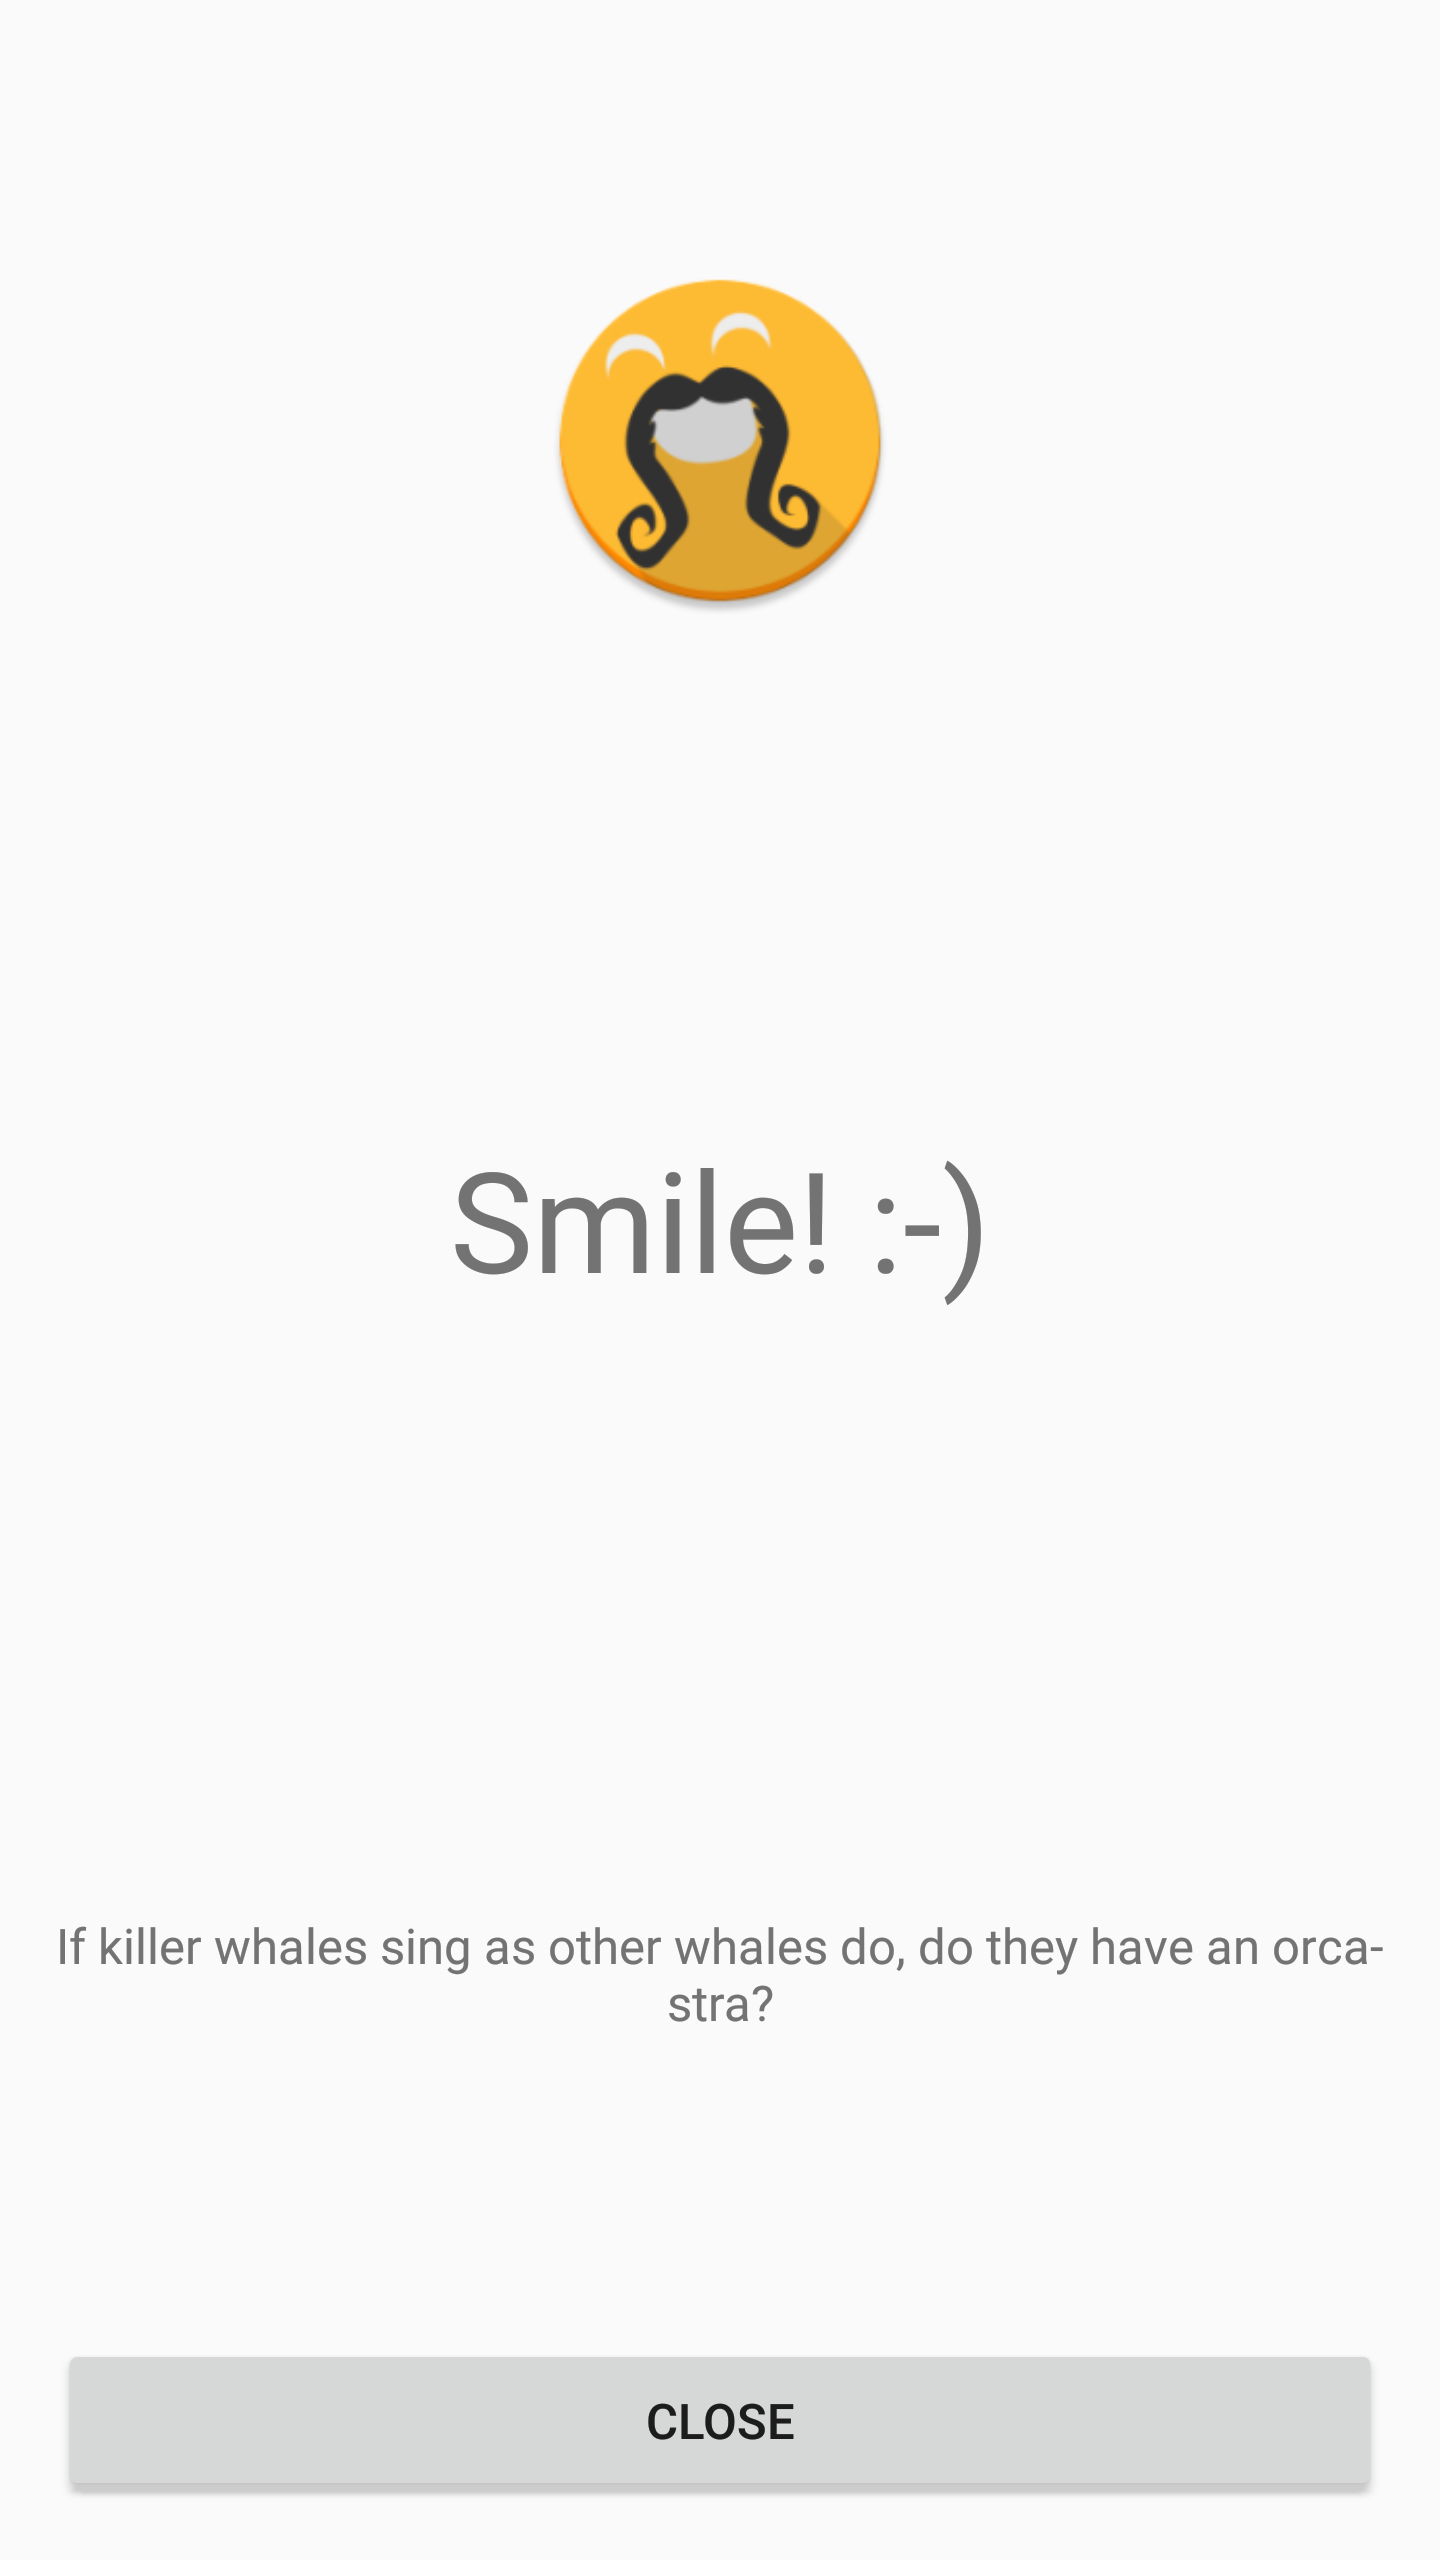 An example smile reminder from the Ten Smiles app